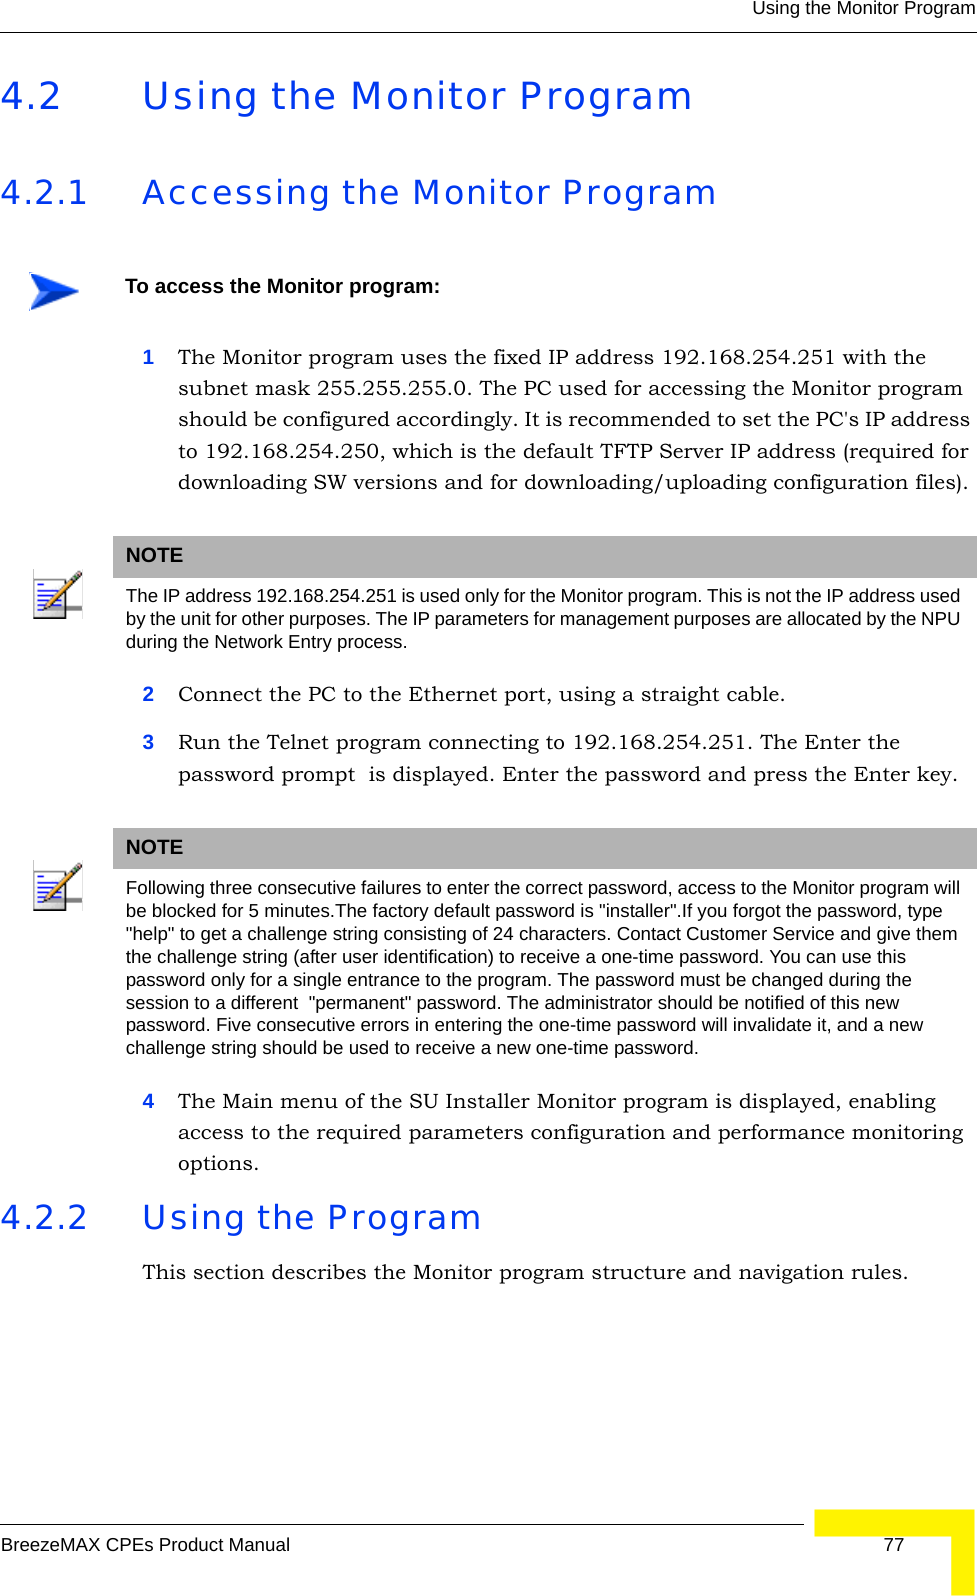 Using the Monitor ProgramBreezeMAX CPEs Product Manual 774.2 Using the Monitor Program4.2.1 Accessing the Monitor Program1The Monitor program uses the fixed IP address 192.168.254.251 with the subnet mask 255.255.255.0. The PC used for accessing the Monitor program should be configured accordingly. It is recommended to set the PC&apos;s IP address to 192.168.254.250, which is the default TFTP Server IP address (required for downloading SW versions and for downloading/uploading configuration files).2Connect the PC to the Ethernet port, using a straight cable.3Run the Telnet program connecting to 192.168.254.251. The Enter the password prompt  is displayed. Enter the password and press the Enter key.4The Main menu of the SU Installer Monitor program is displayed, enabling access to the required parameters configuration and performance monitoring options.4.2.2 Using the ProgramThis section describes the Monitor program structure and navigation rules.To access the Monitor program:NOTEThe IP address 192.168.254.251 is used only for the Monitor program. This is not the IP address used by the unit for other purposes. The IP parameters for management purposes are allocated by the NPU during the Network Entry process.NOTEFollowing three consecutive failures to enter the correct password, access to the Monitor program will be blocked for 5 minutes.The factory default password is &quot;installer&quot;.If you forgot the password, type &quot;help&quot; to get a challenge string consisting of 24 characters. Contact Customer Service and give them the challenge string (after user identification) to receive a one-time password. You can use this password only for a single entrance to the program. The password must be changed during the session to a different  &quot;permanent&quot; password. The administrator should be notified of this new password. Five consecutive errors in entering the one-time password will invalidate it, and a new challenge string should be used to receive a new one-time password.